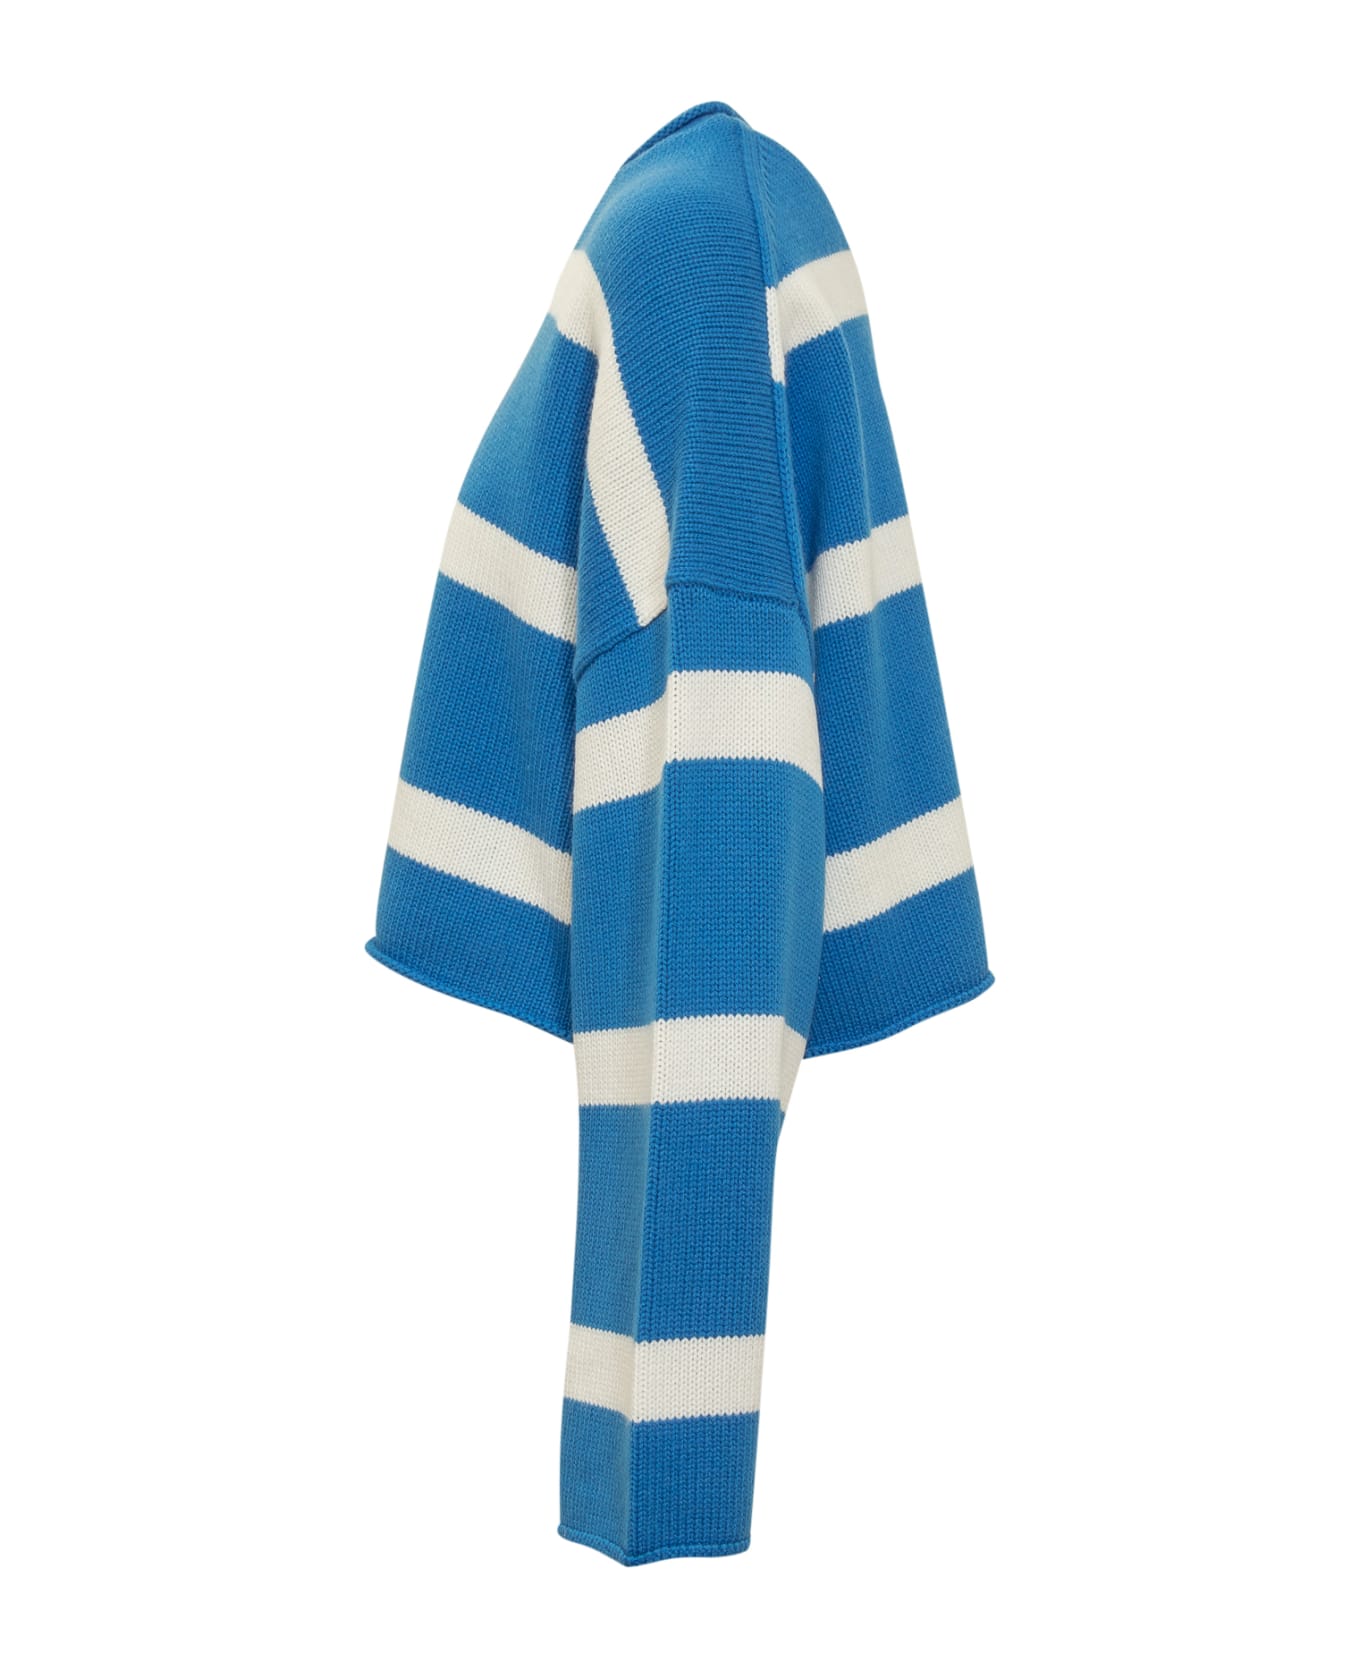 J.W. Anderson Cropped Anchor Jumper - BLUE/WHITE